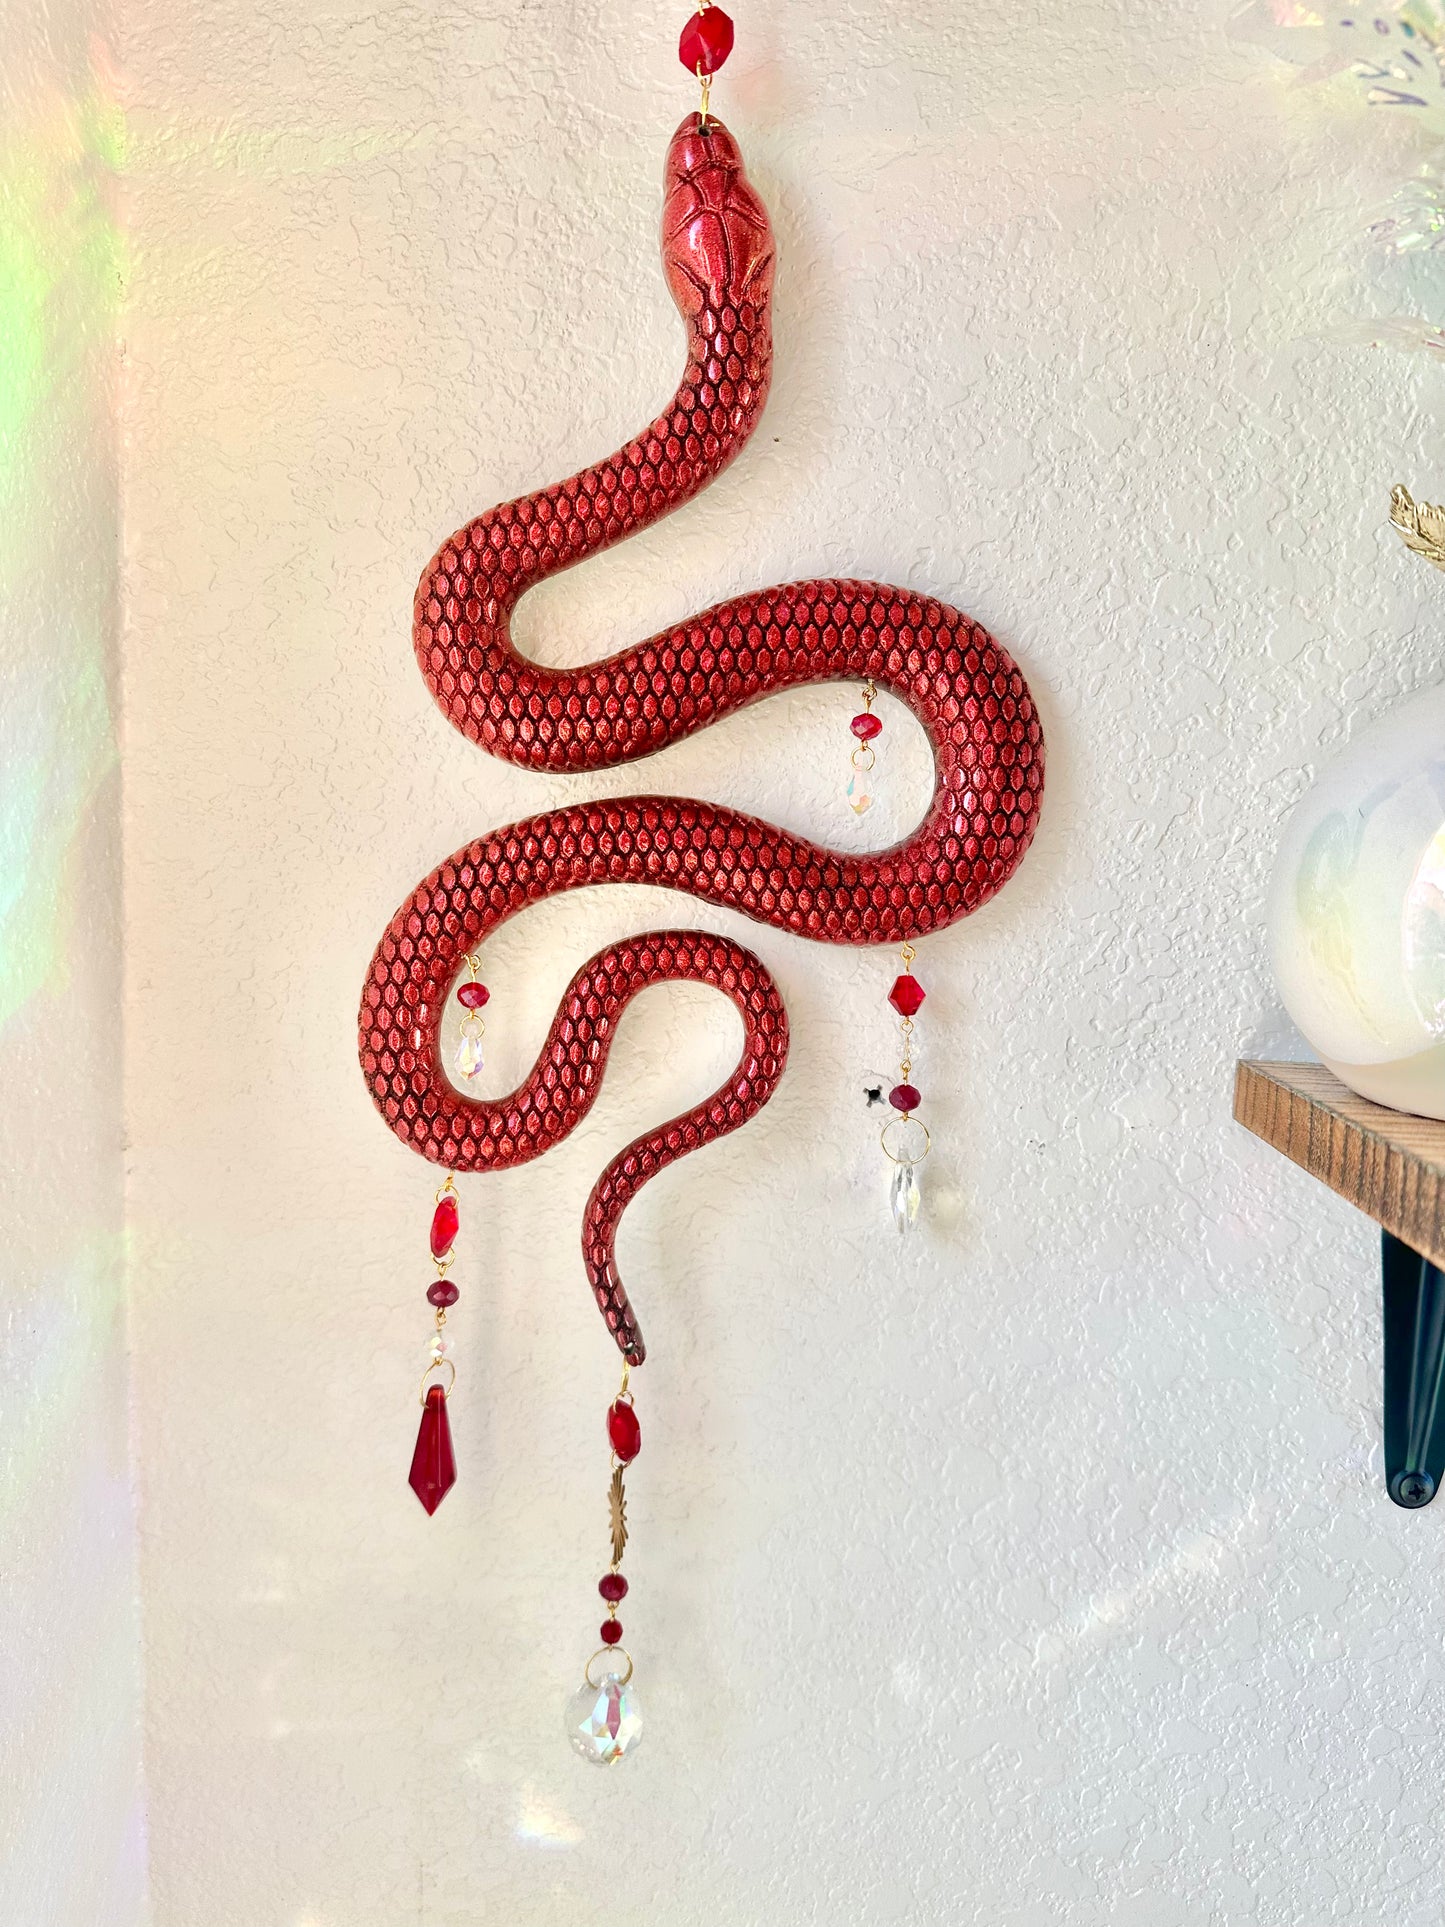 Red holographic snake sun-catcher